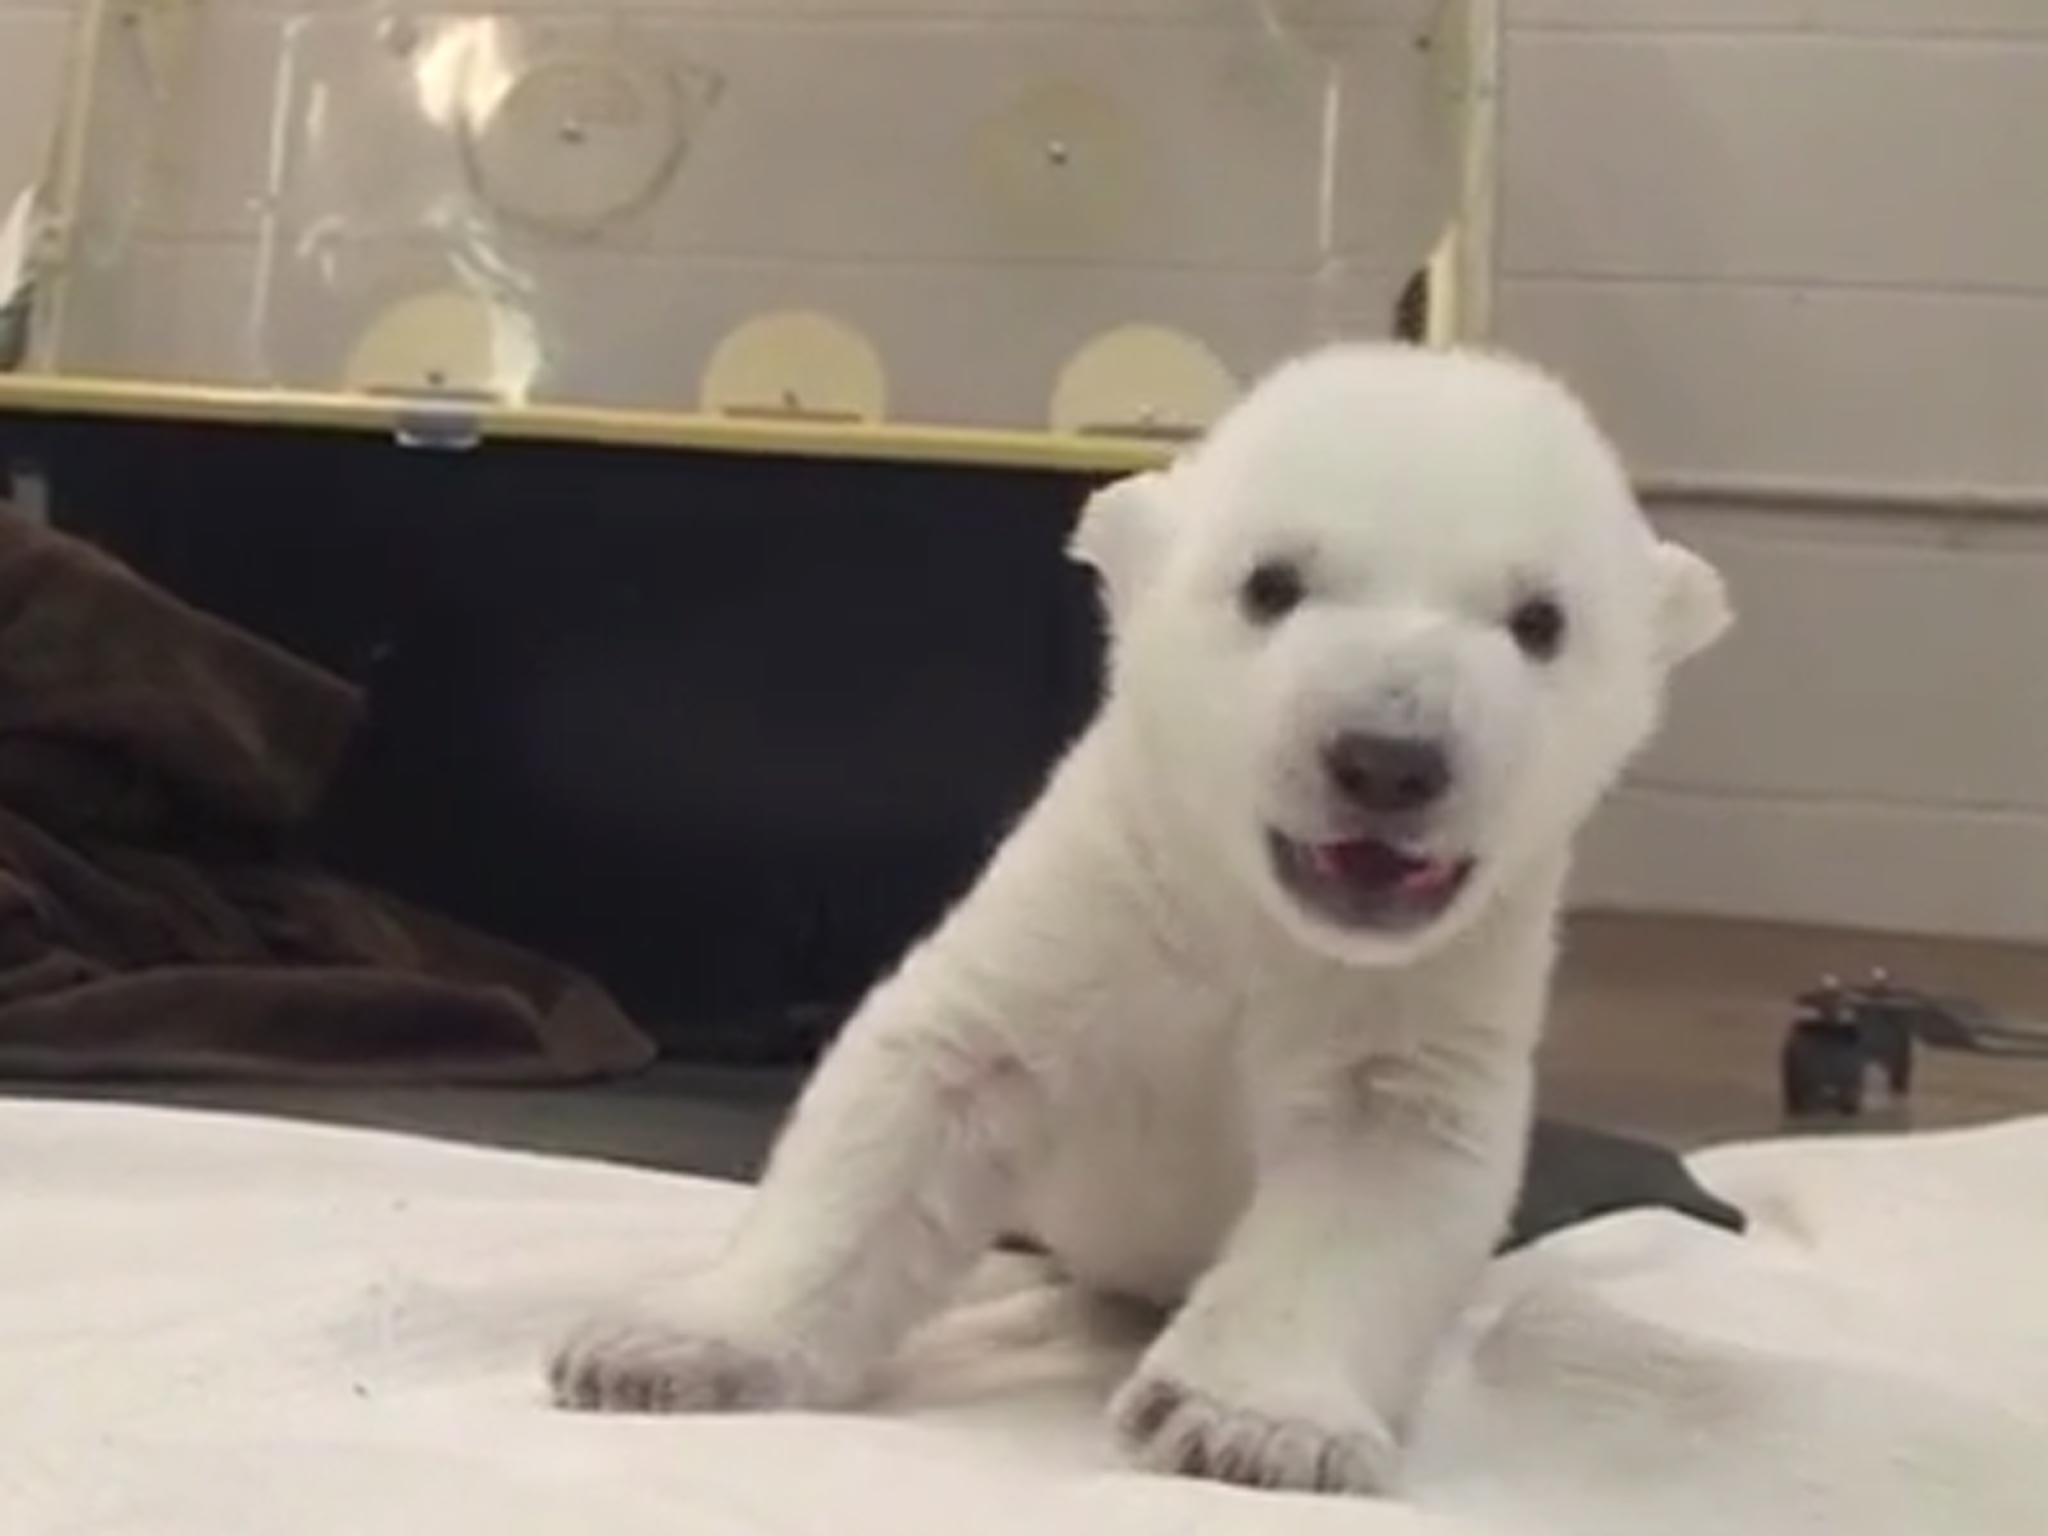 The polar bear cub at Toronto Zoo can seen taking its first steps